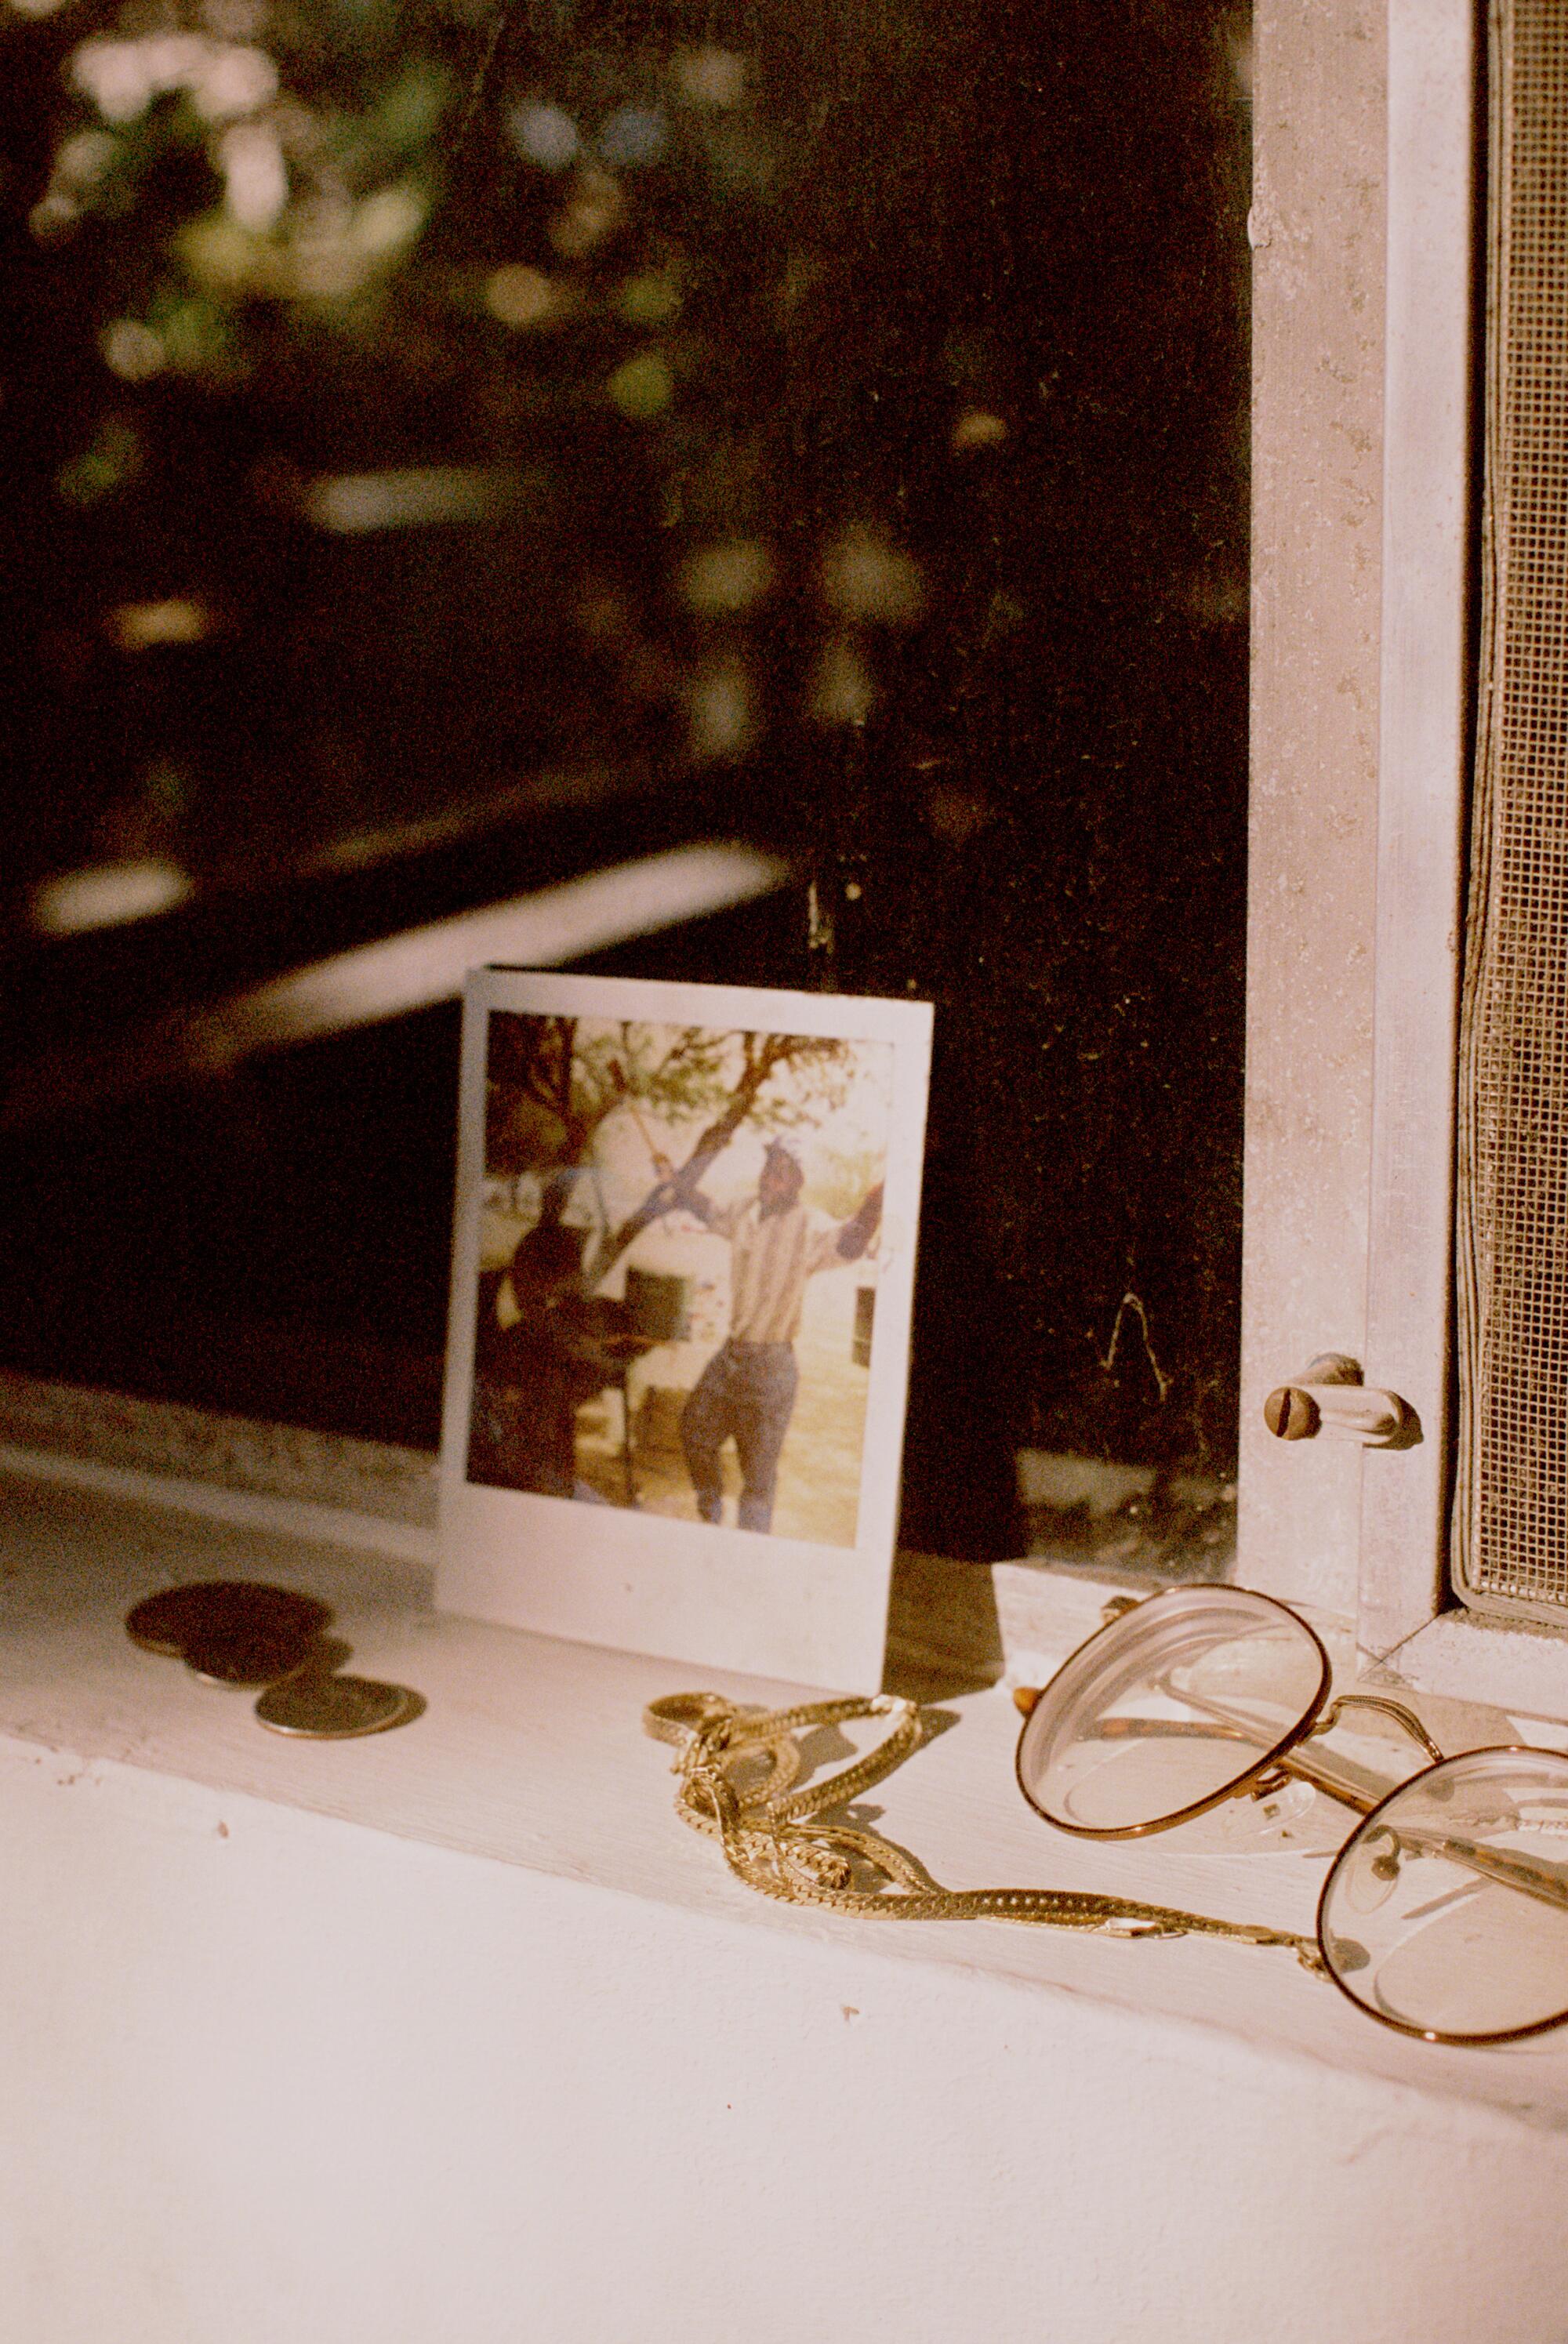 A Polaroid photo and wire-rimmed spectacles on a windowsill